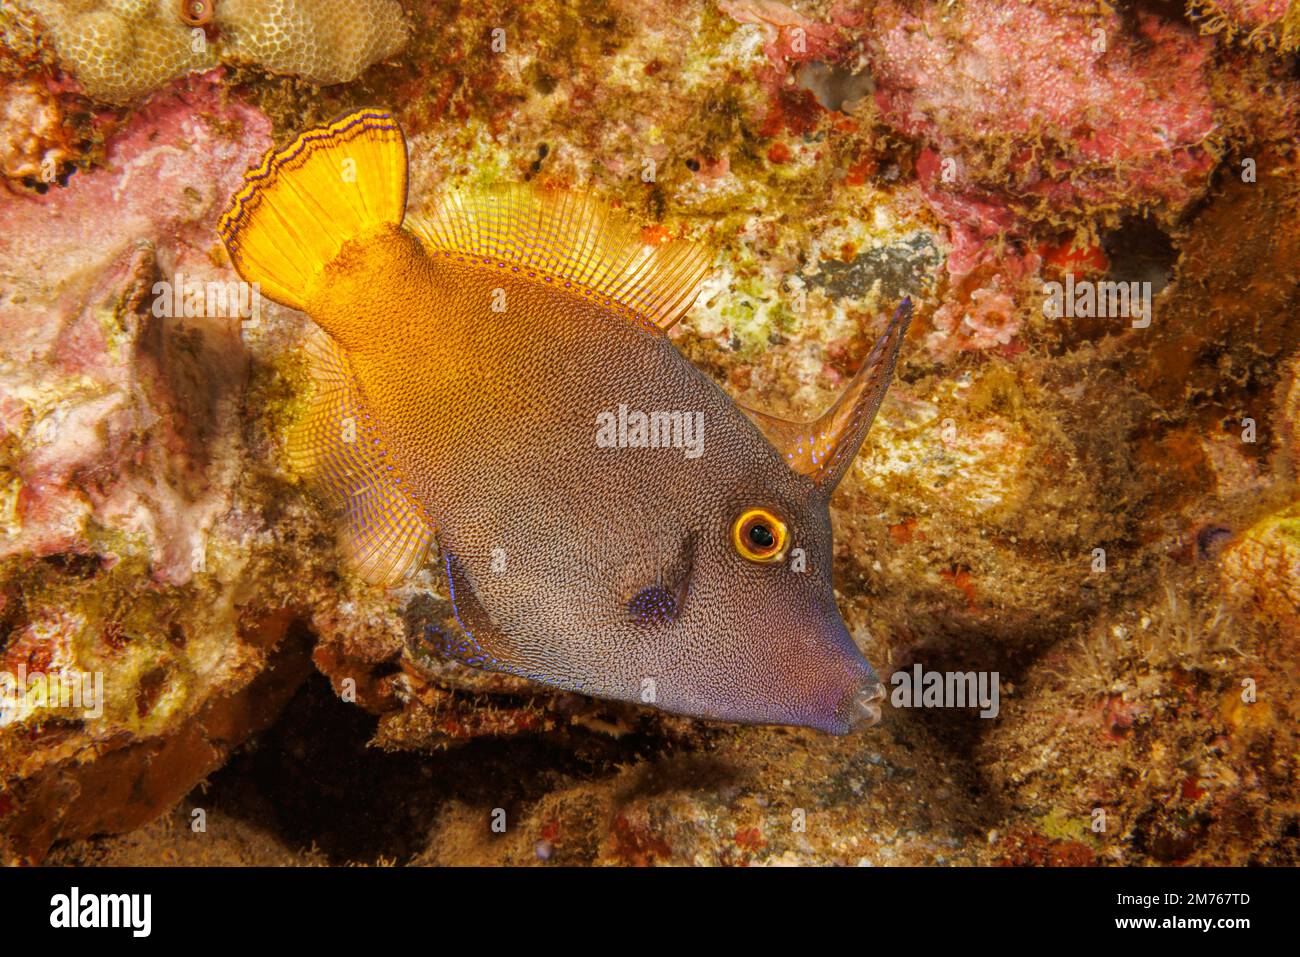 It is said that the yellowtail filefish, Pervagor aspricaudus, can reach 7 inches in length, although most in Hawaii are half this size. Stock Photo